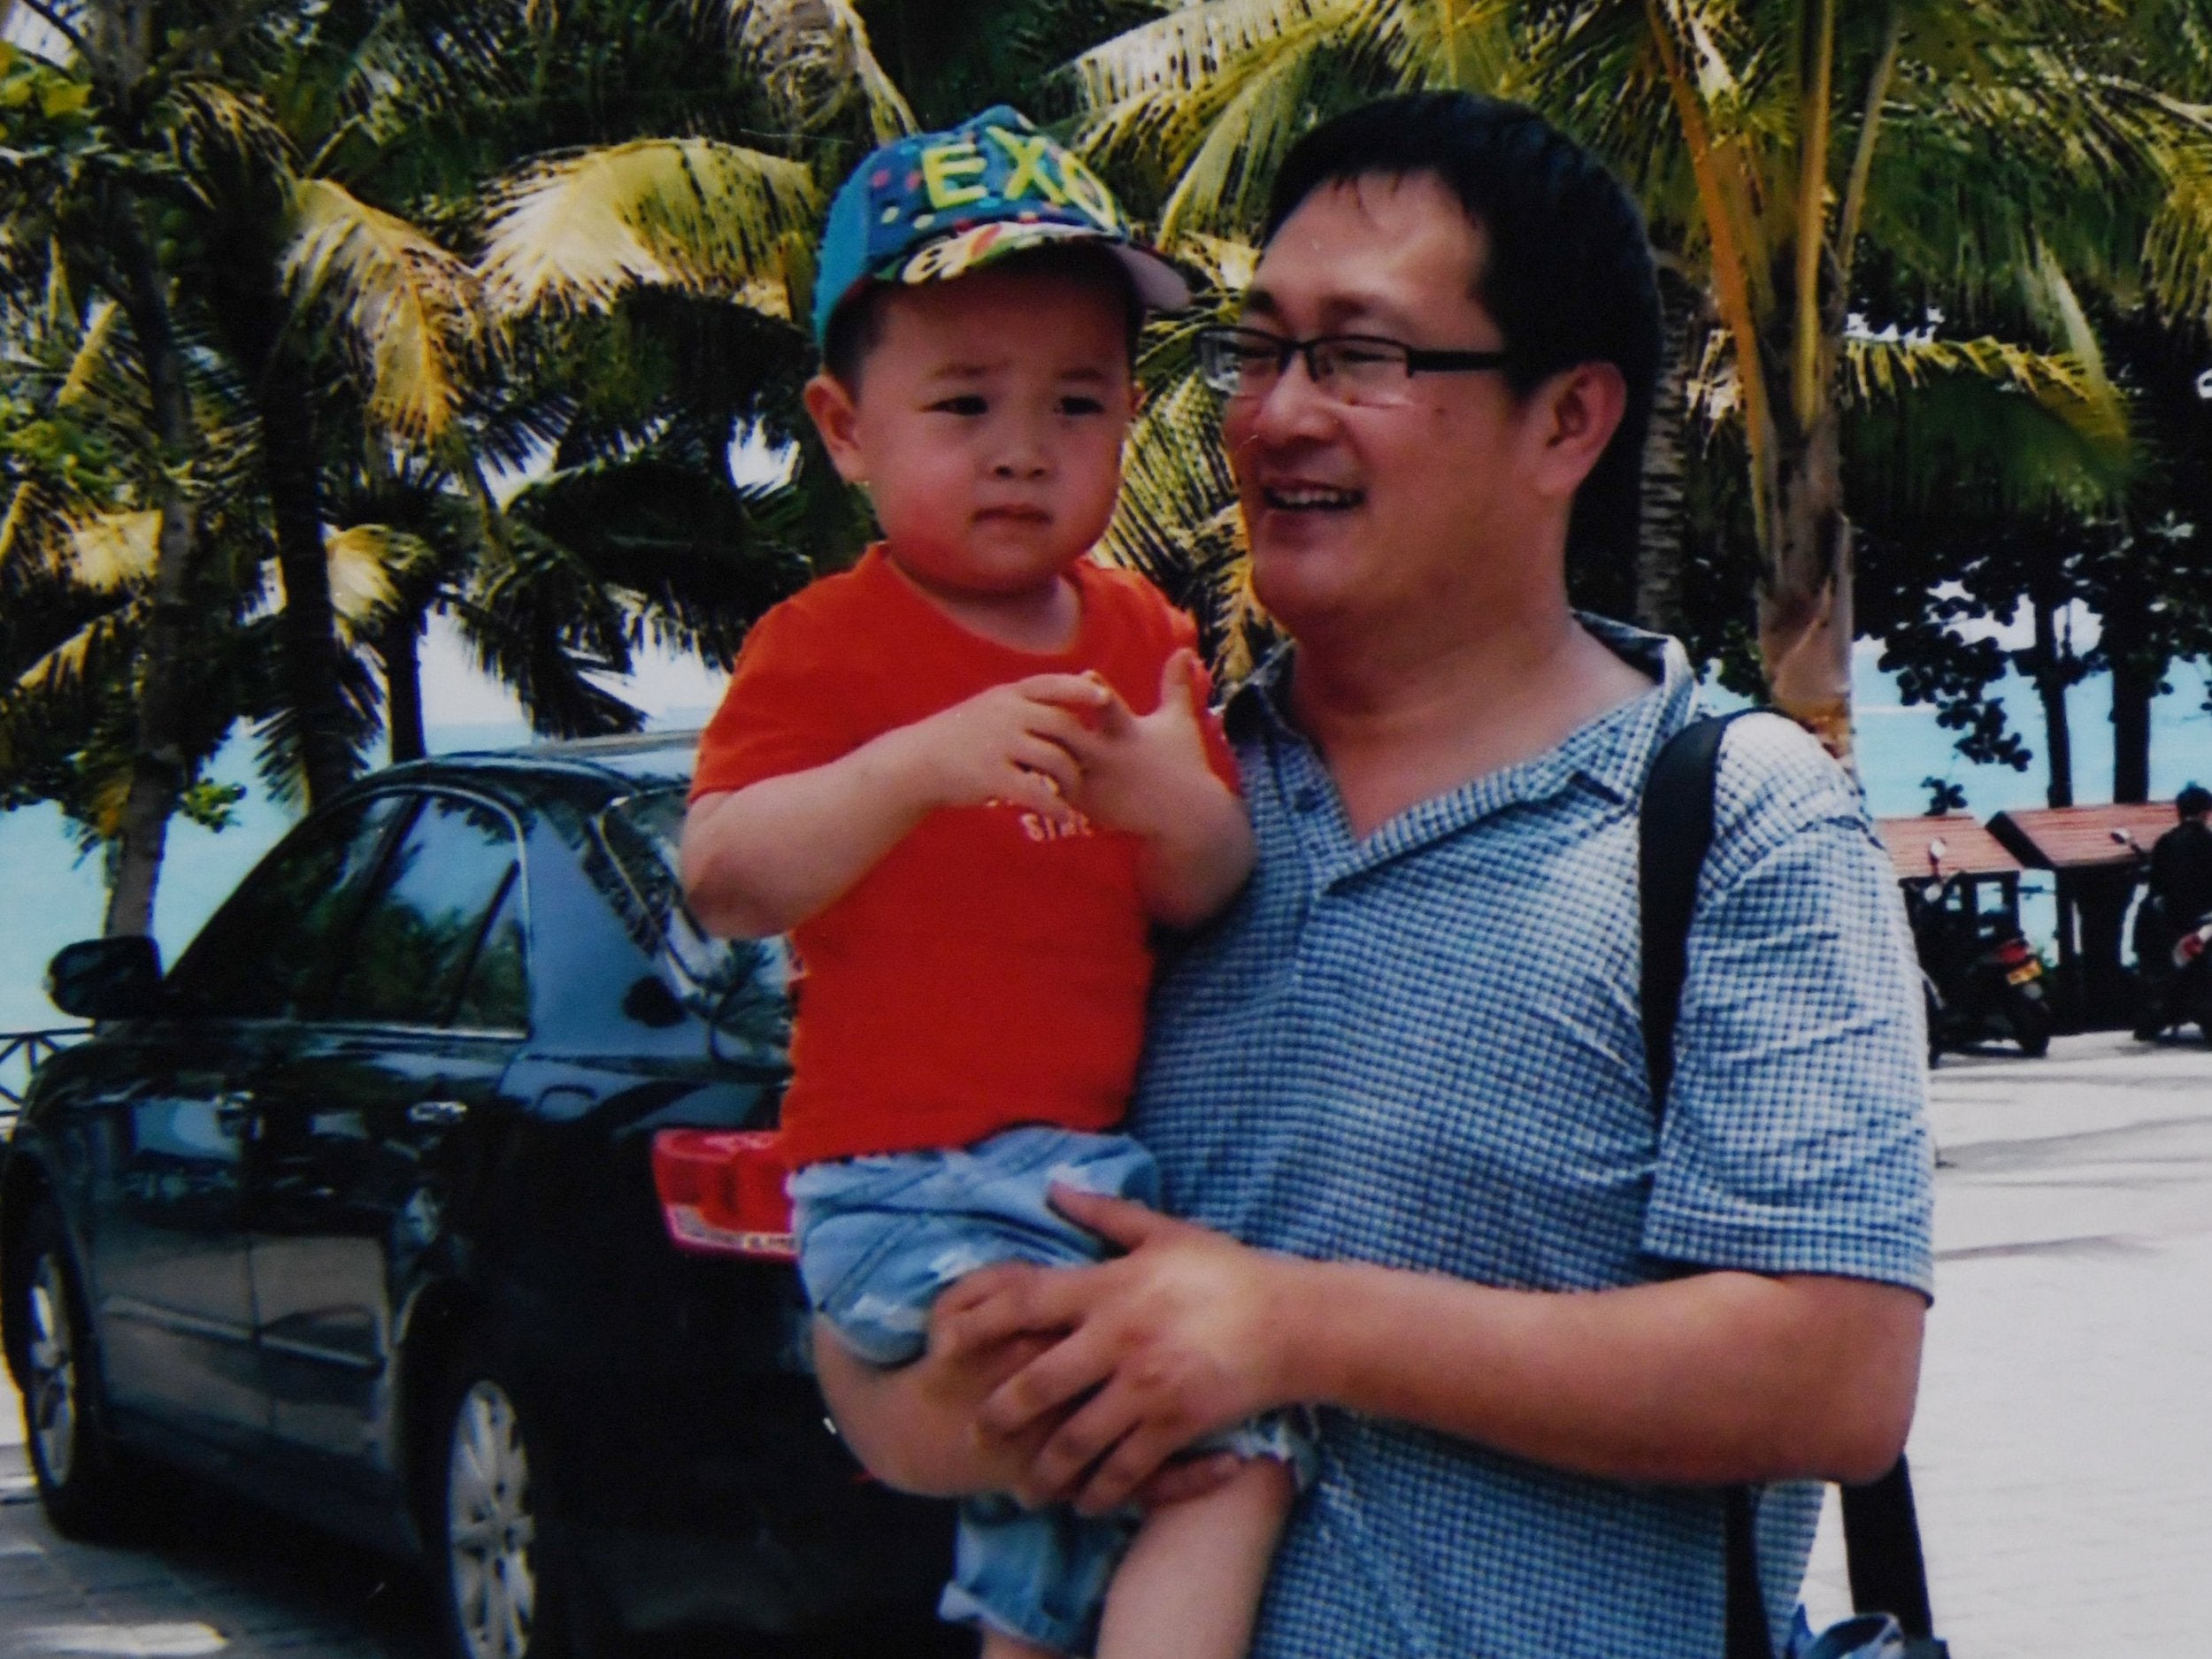 Wang Quanzhang (R) is seen here with his son Wang Guangwei in China's southern Hainan province, not long before he was taken away by the authorities in 2015